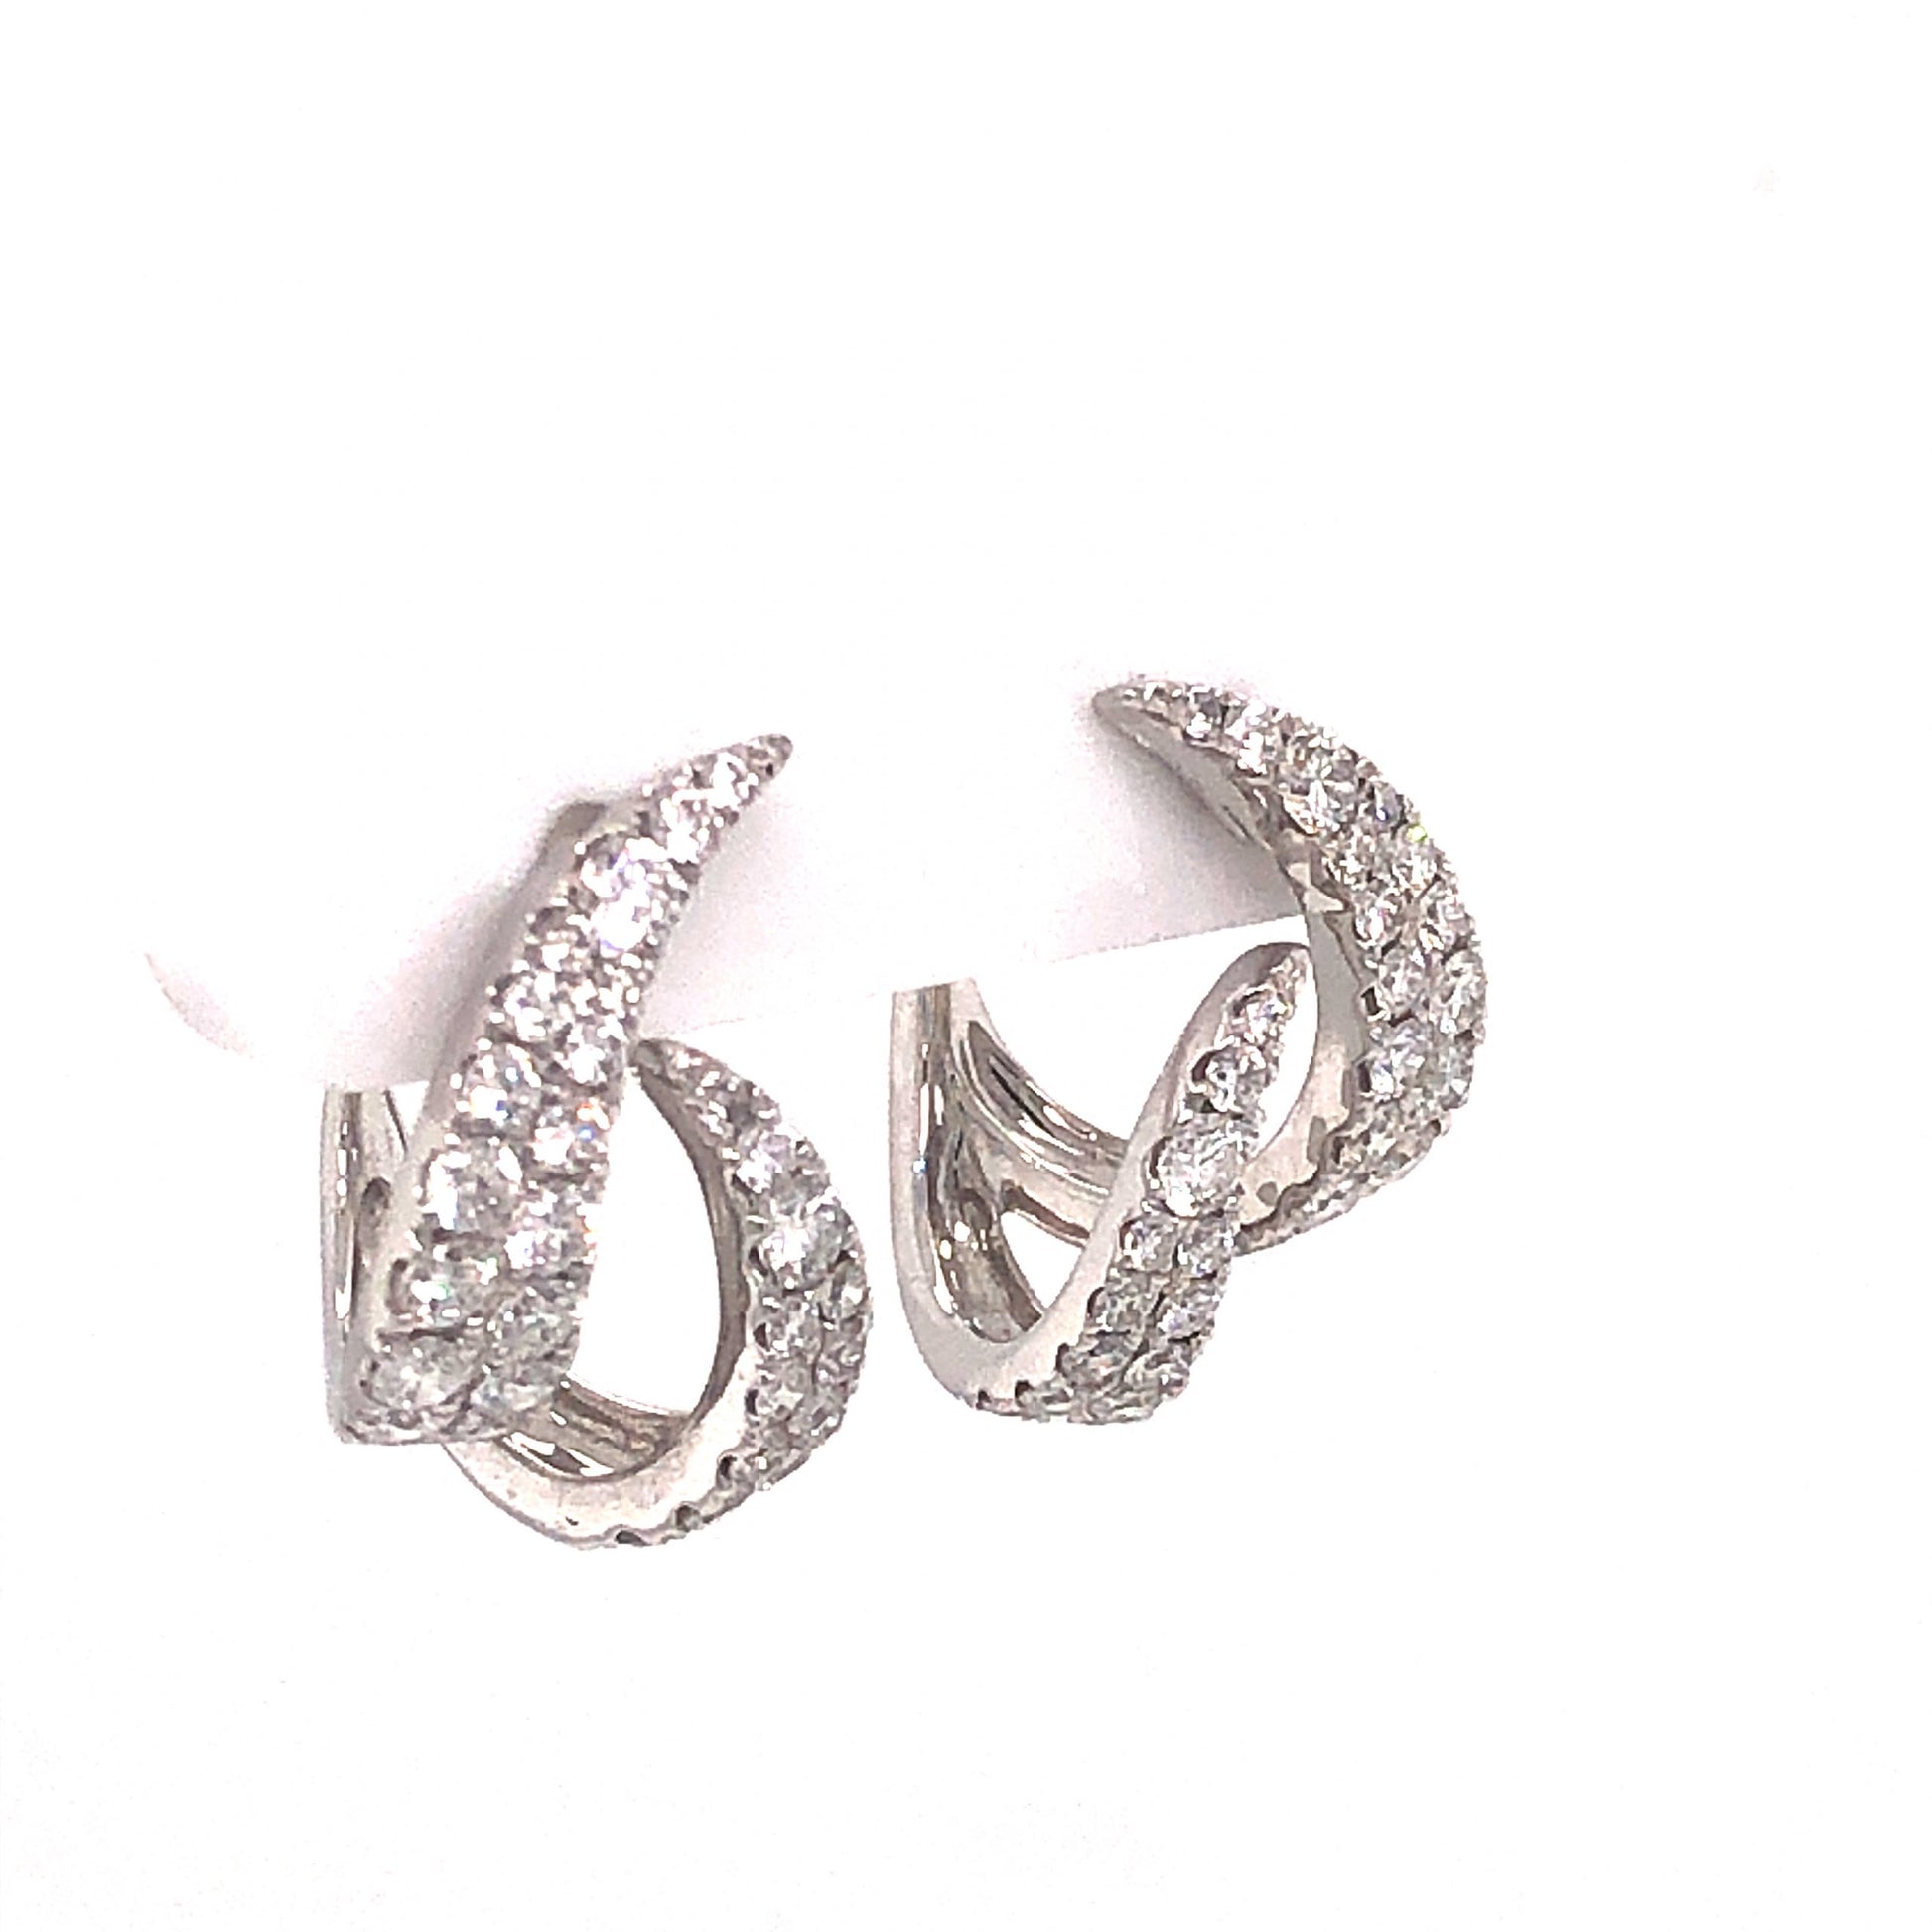 Bony Levy Pave Diamond Earring Studs in 18k White Gold